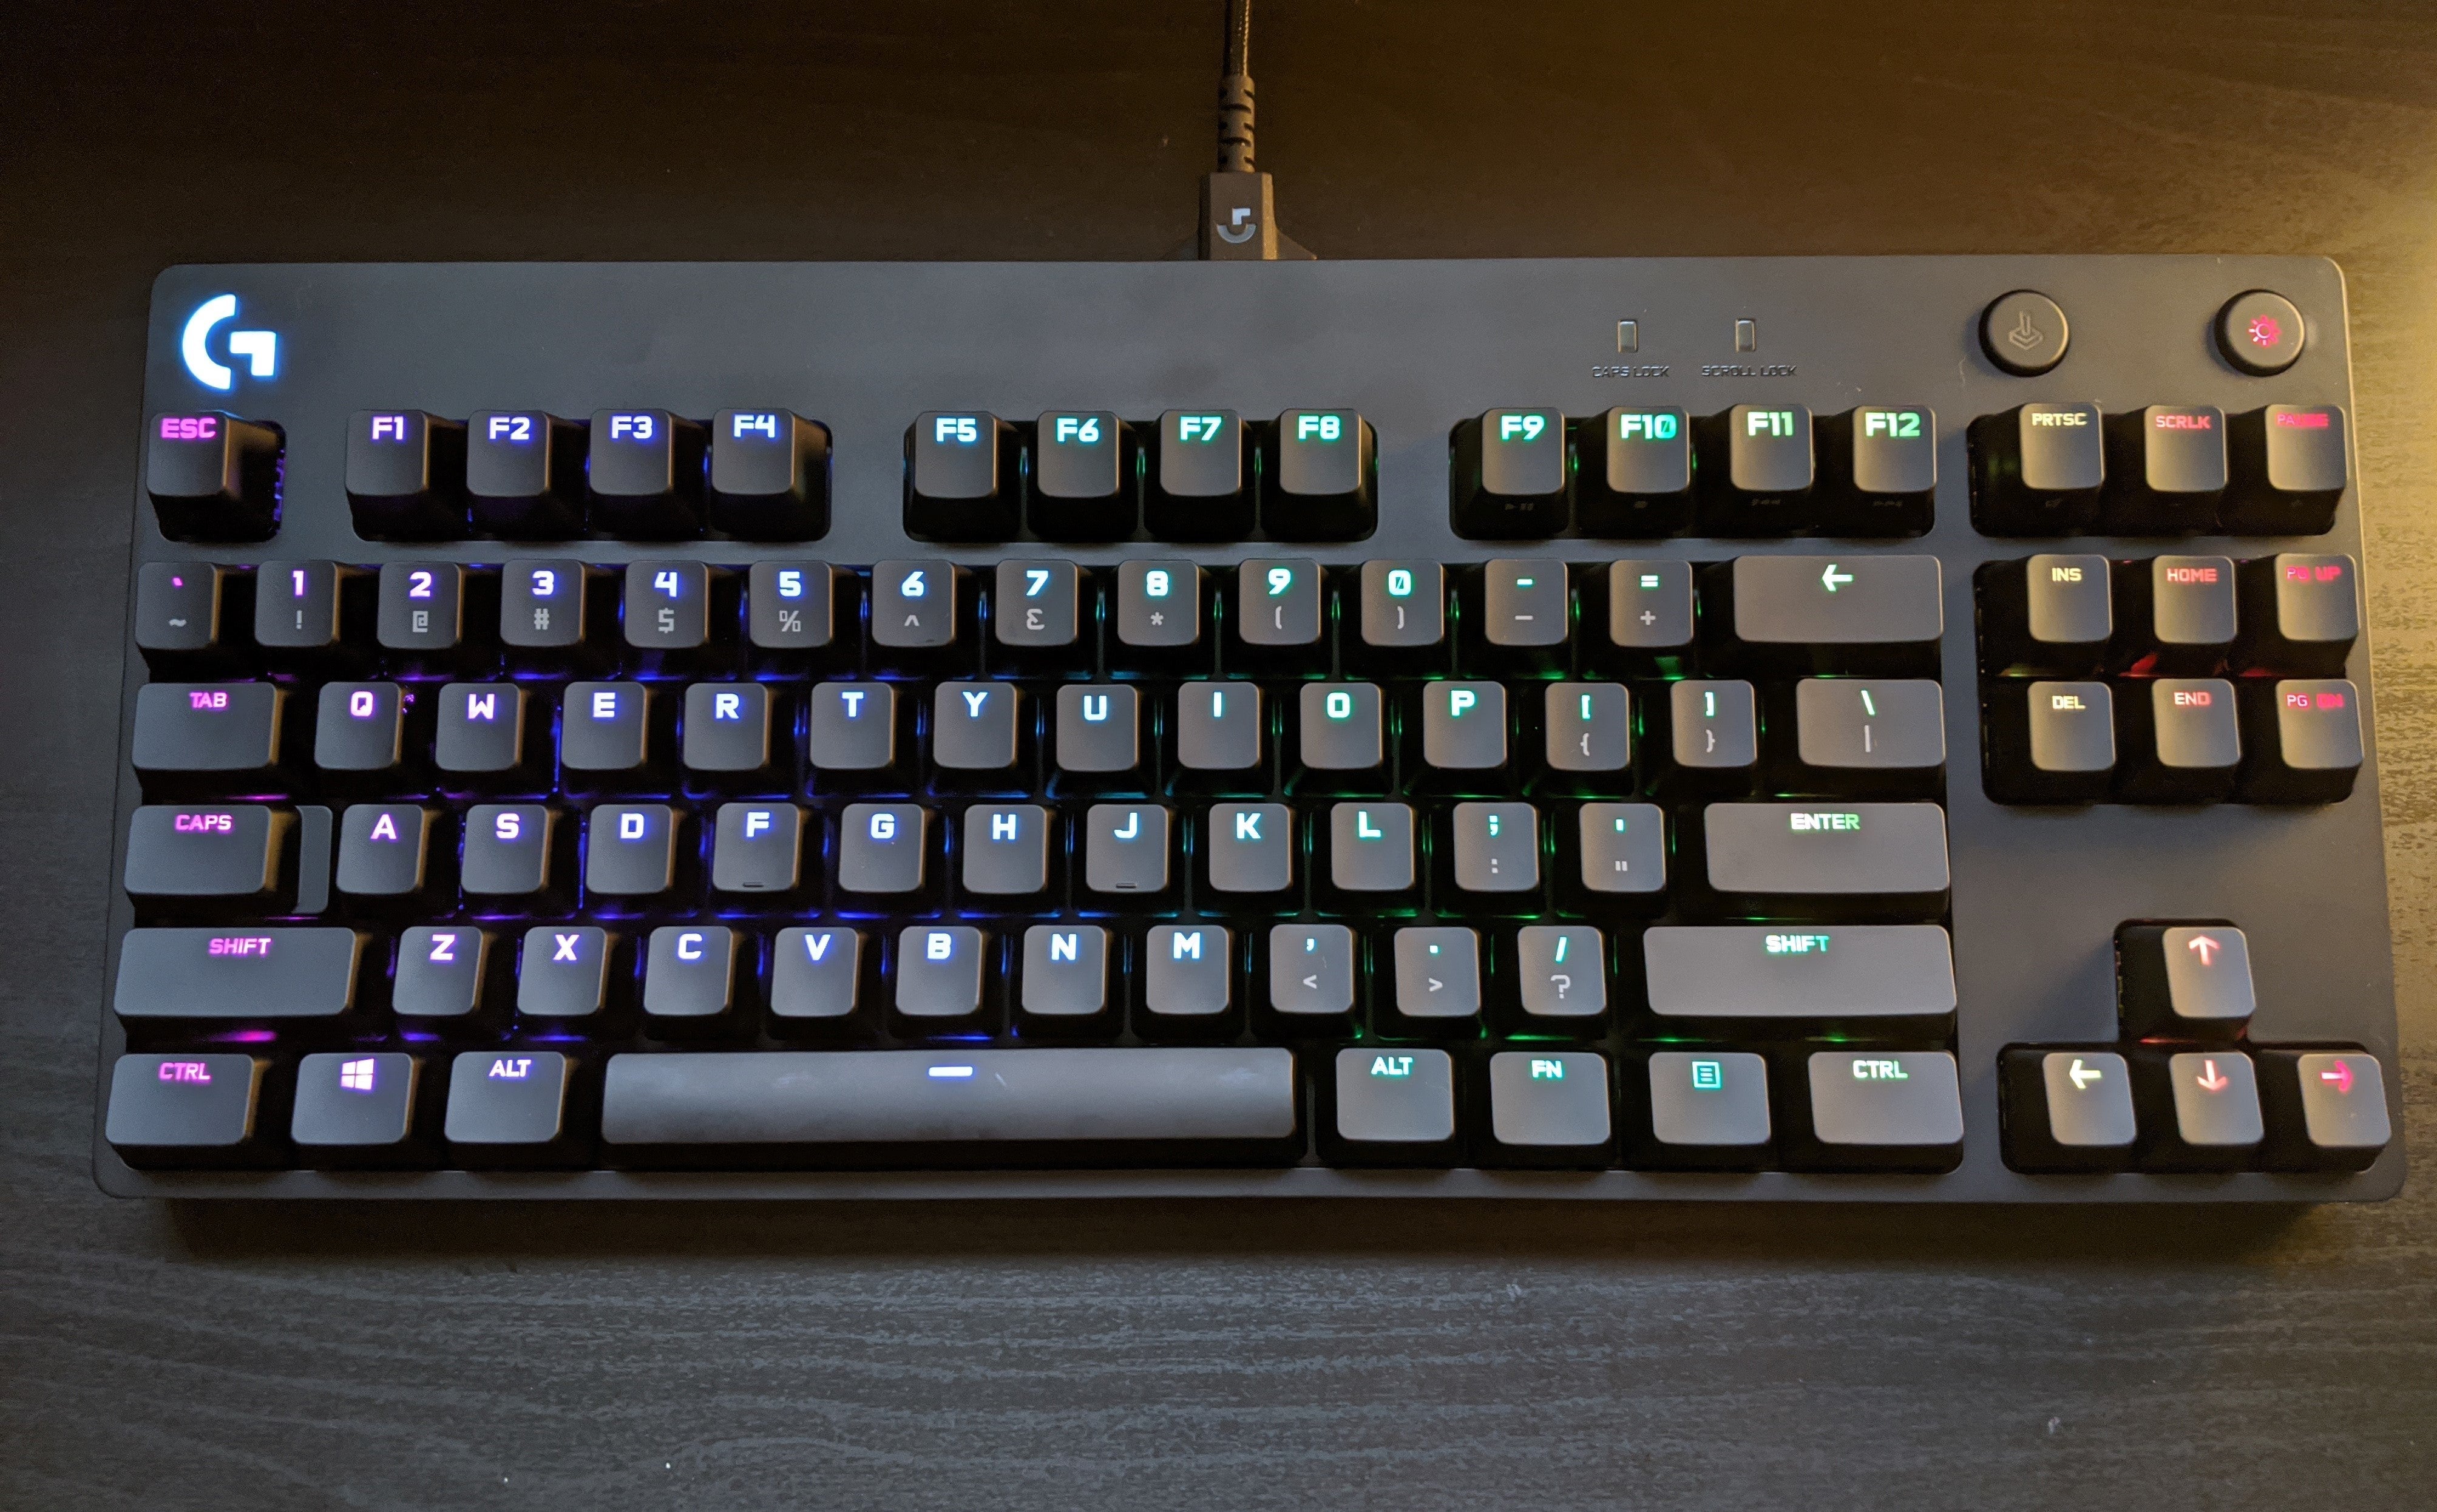 Logitech G Pro X Keyboard review: Hot-swappable switches let you mix